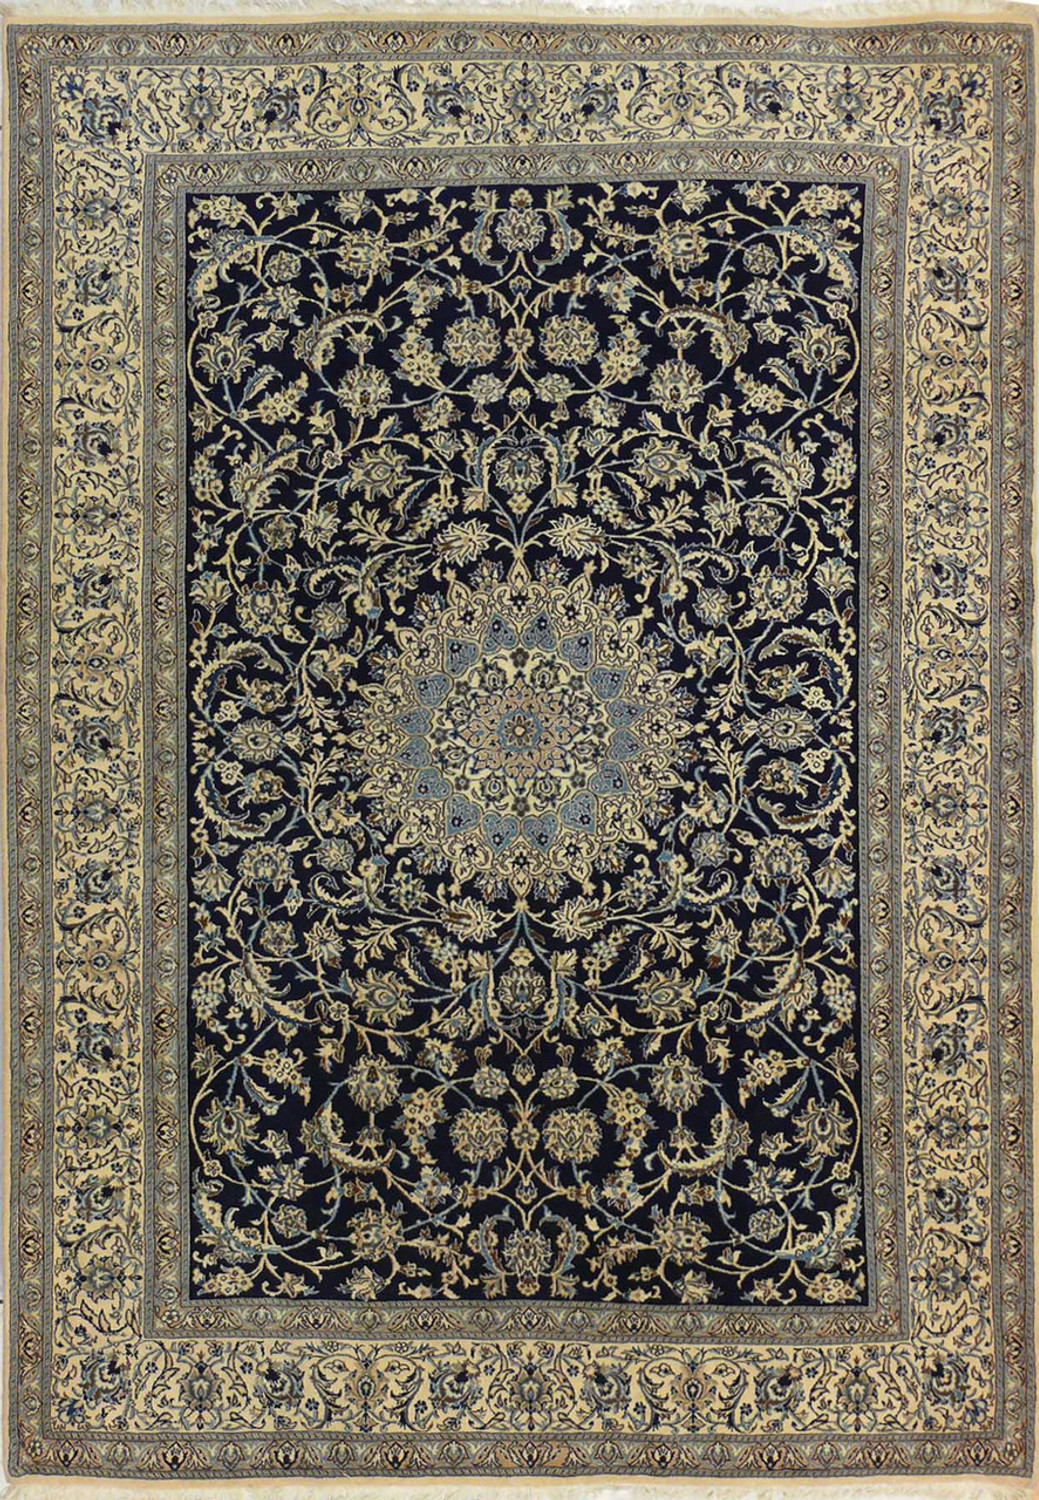 A luxurious Persian 7x10 Nain 9 LAA Wool & Silk Rug with a central medallion and intricate border designs in a rich indigo and cream color palette